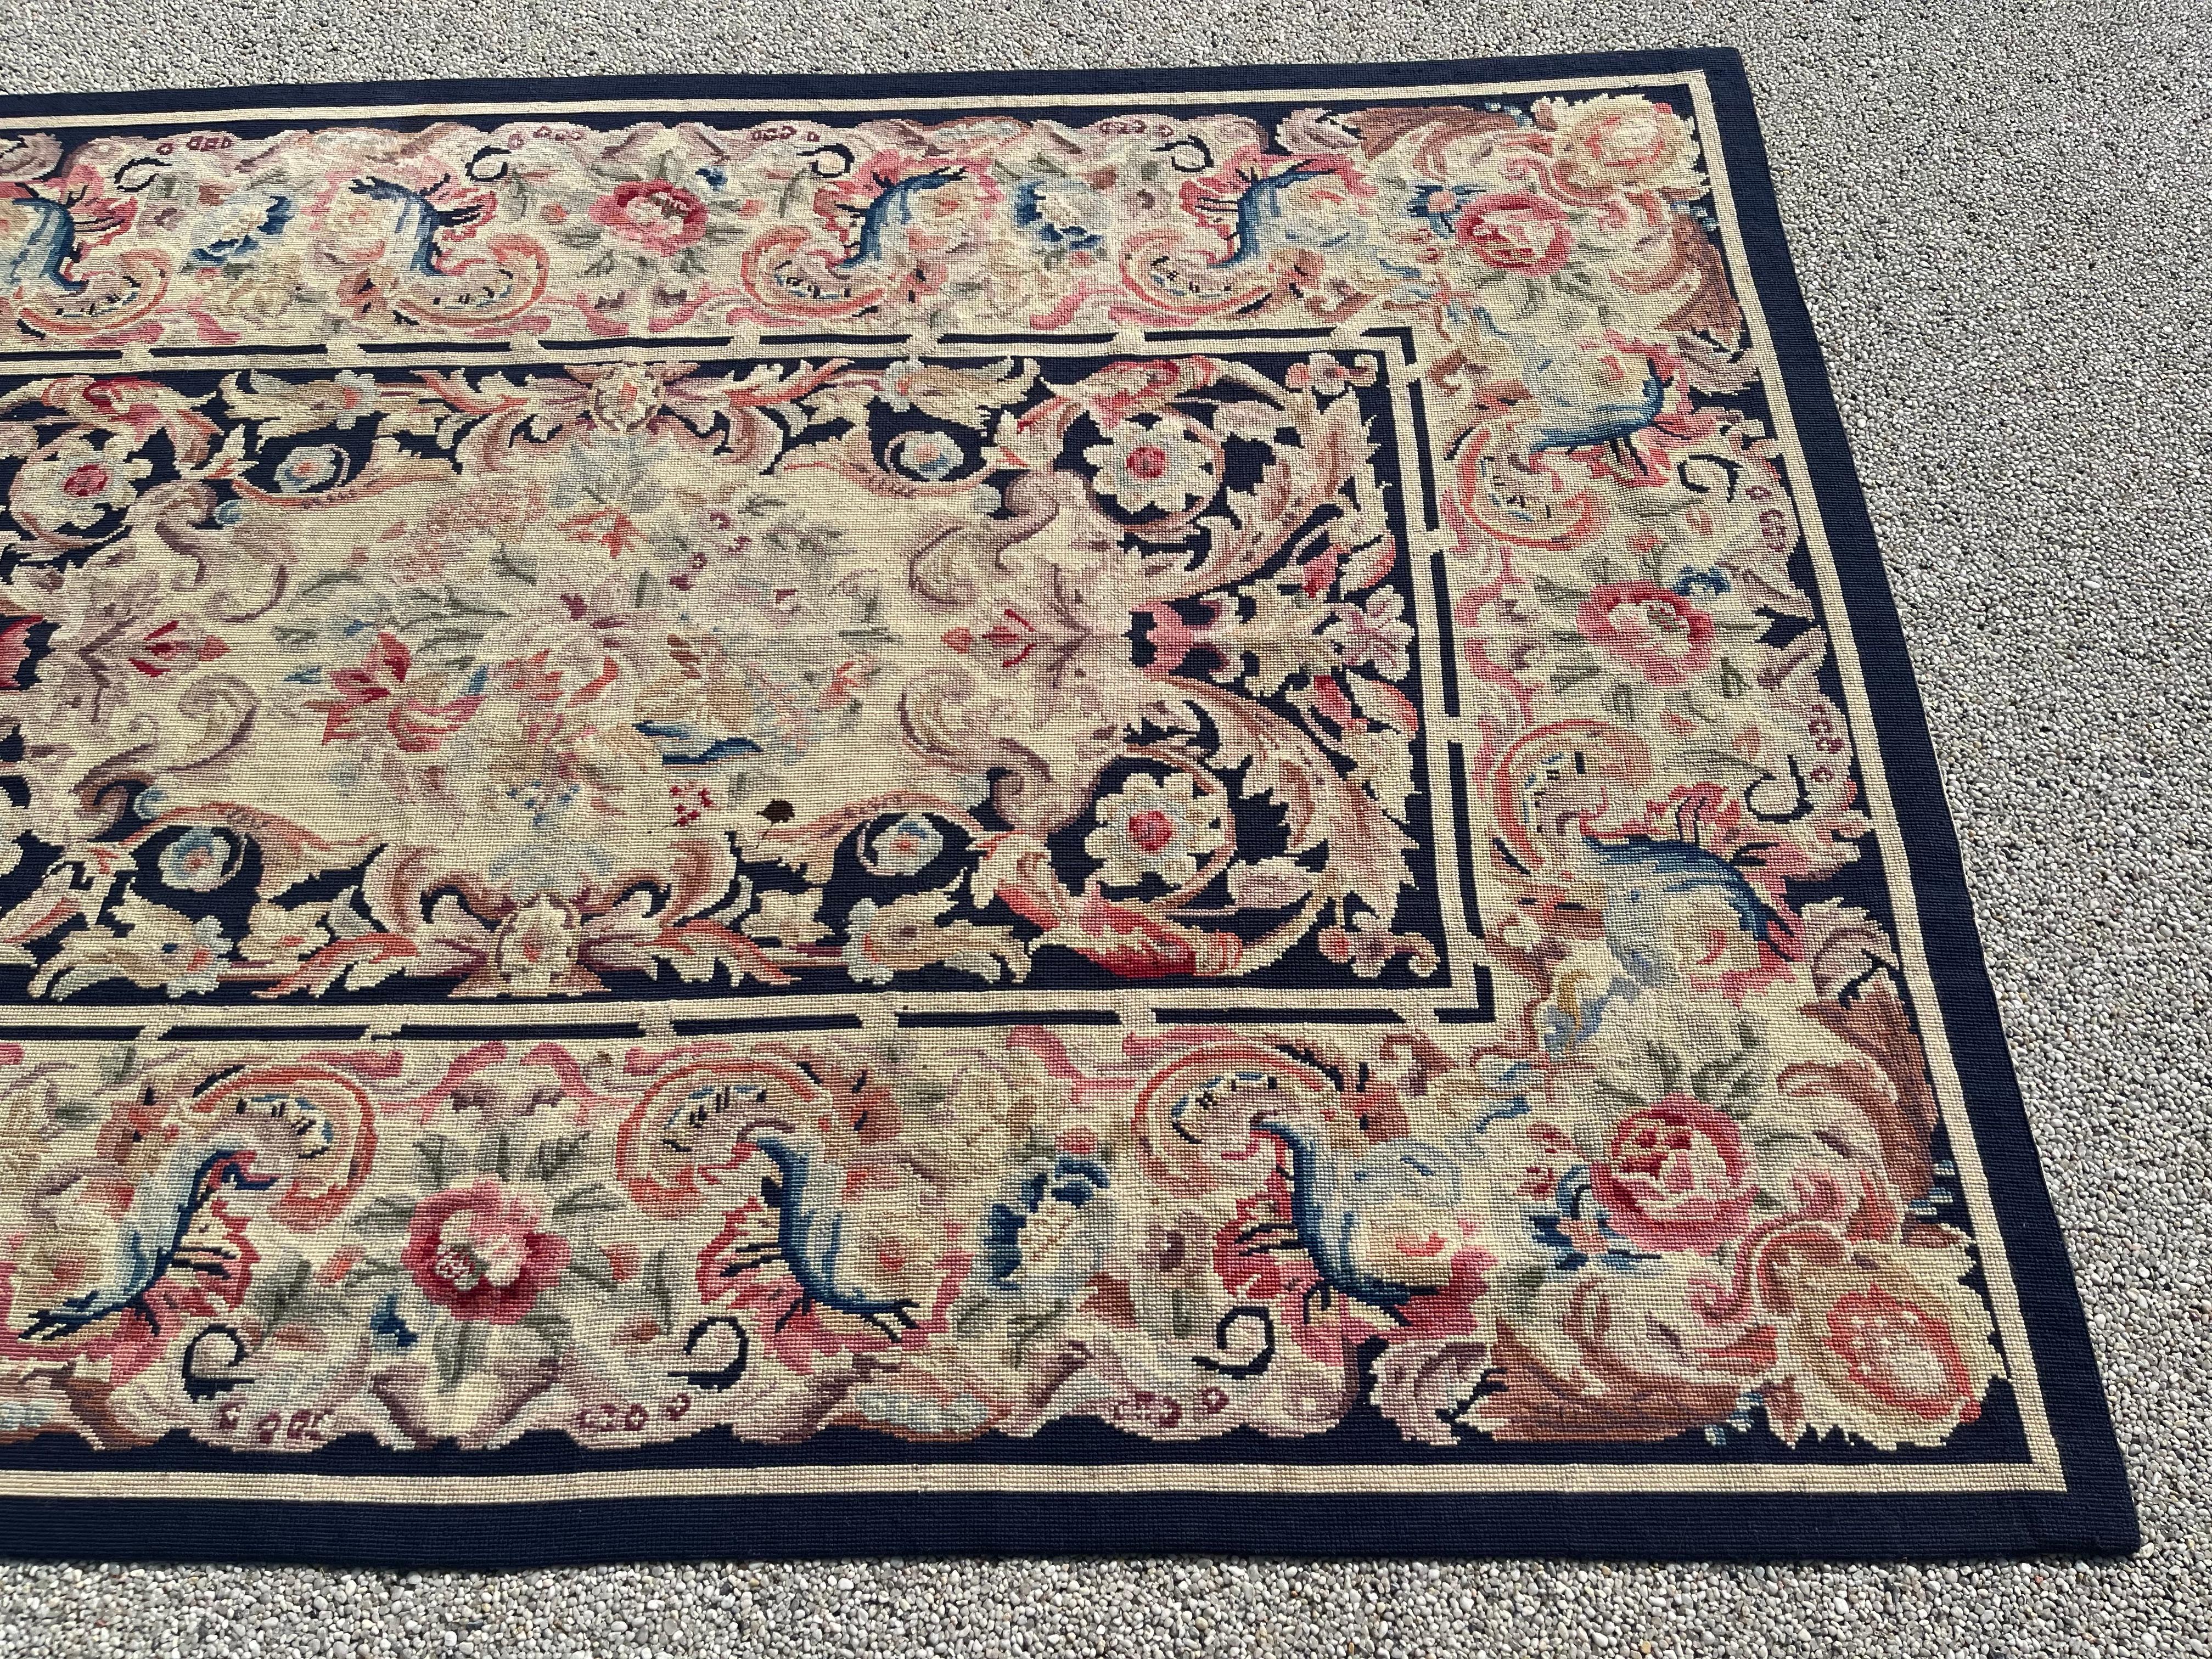 Wool Carpet with knotted stitches in the style of Aubusson For Sale